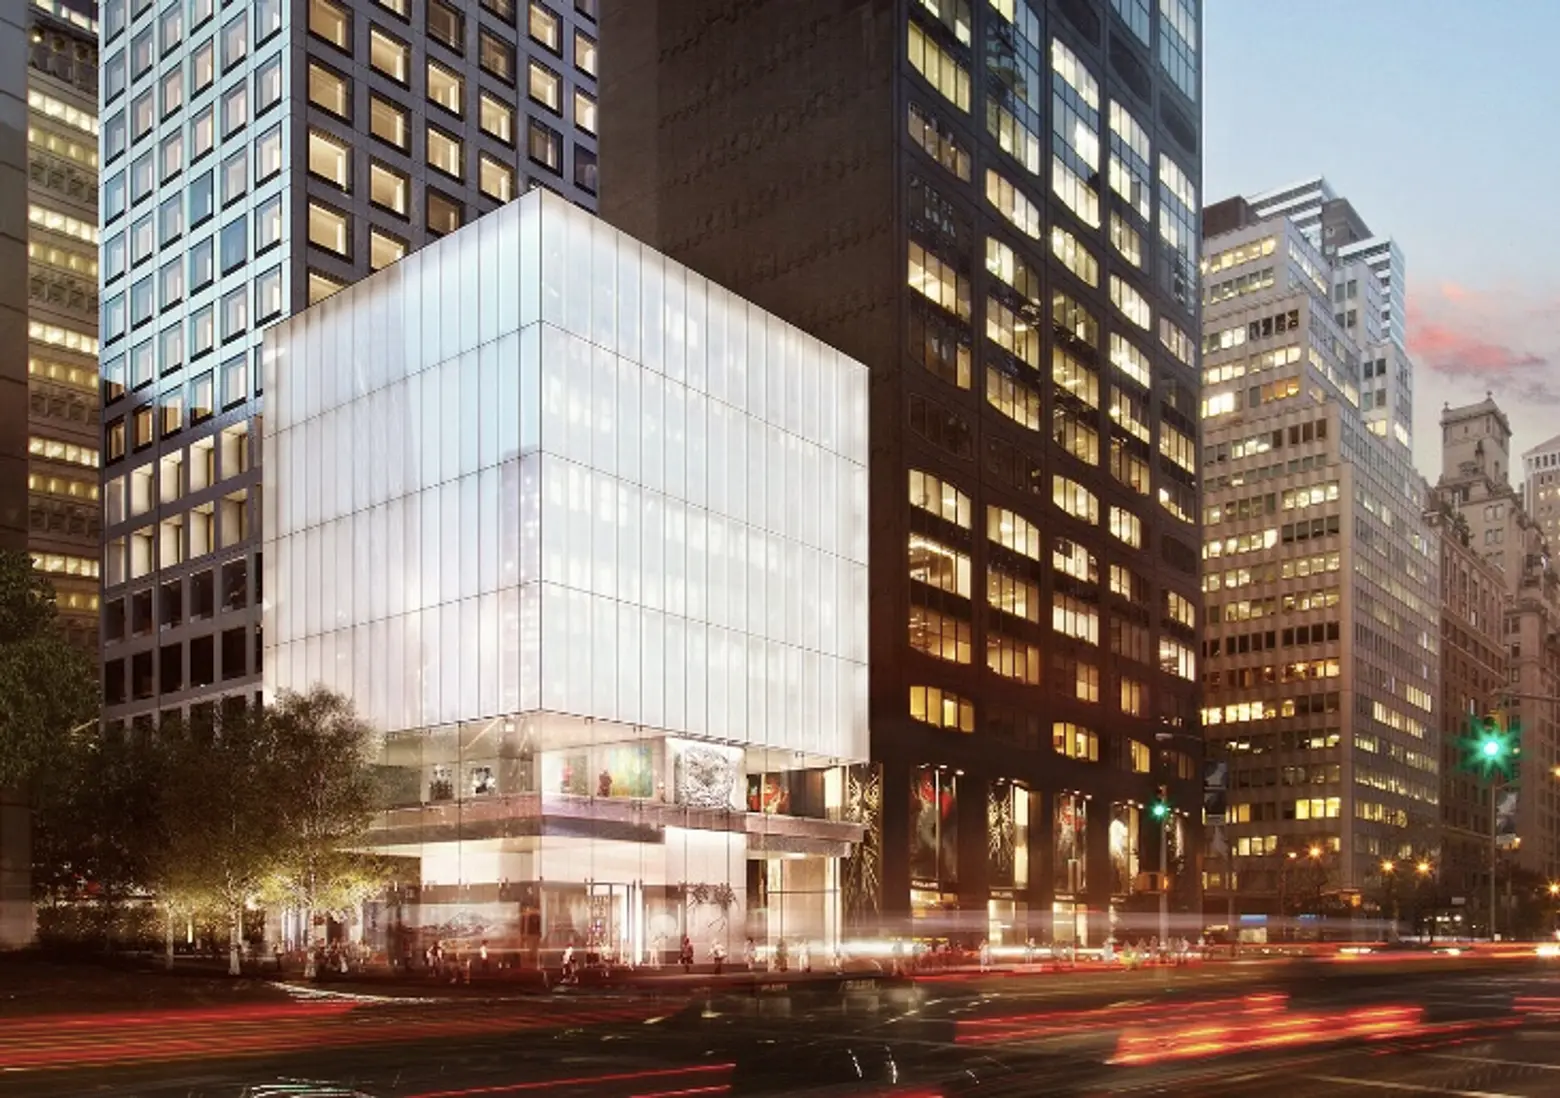 432 Park Avenue Reveals Glowing White Cube for Retail Space